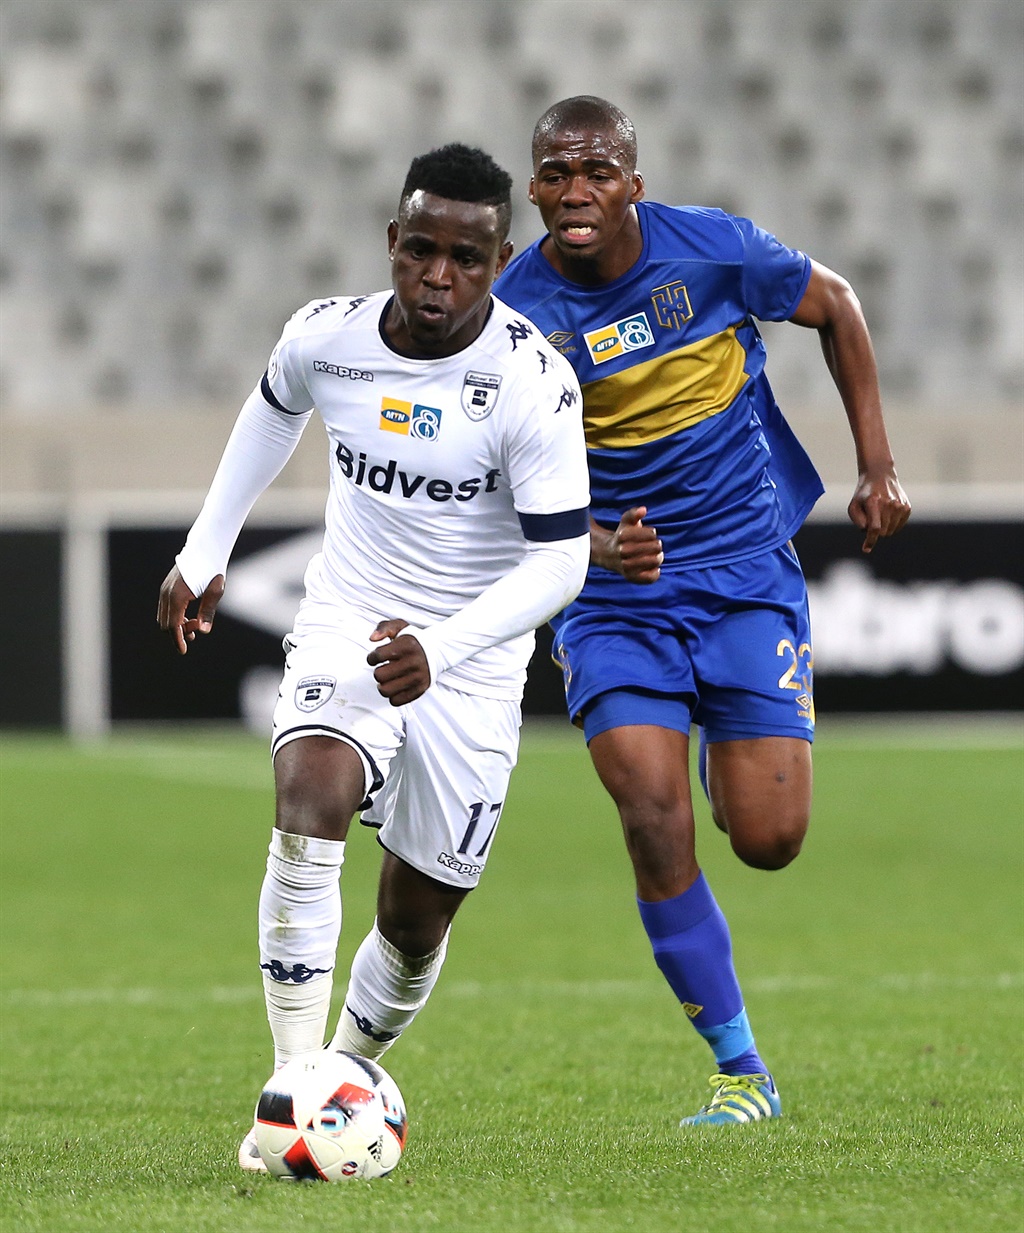 Gabadihno Mhango of Wits during the MTN 8 Semi Final, 2nd Leg match between Cape Town City FC and Bidvest Wits at Cape Town Stadium on September 17, 2016 in Cape Town, South Africa.